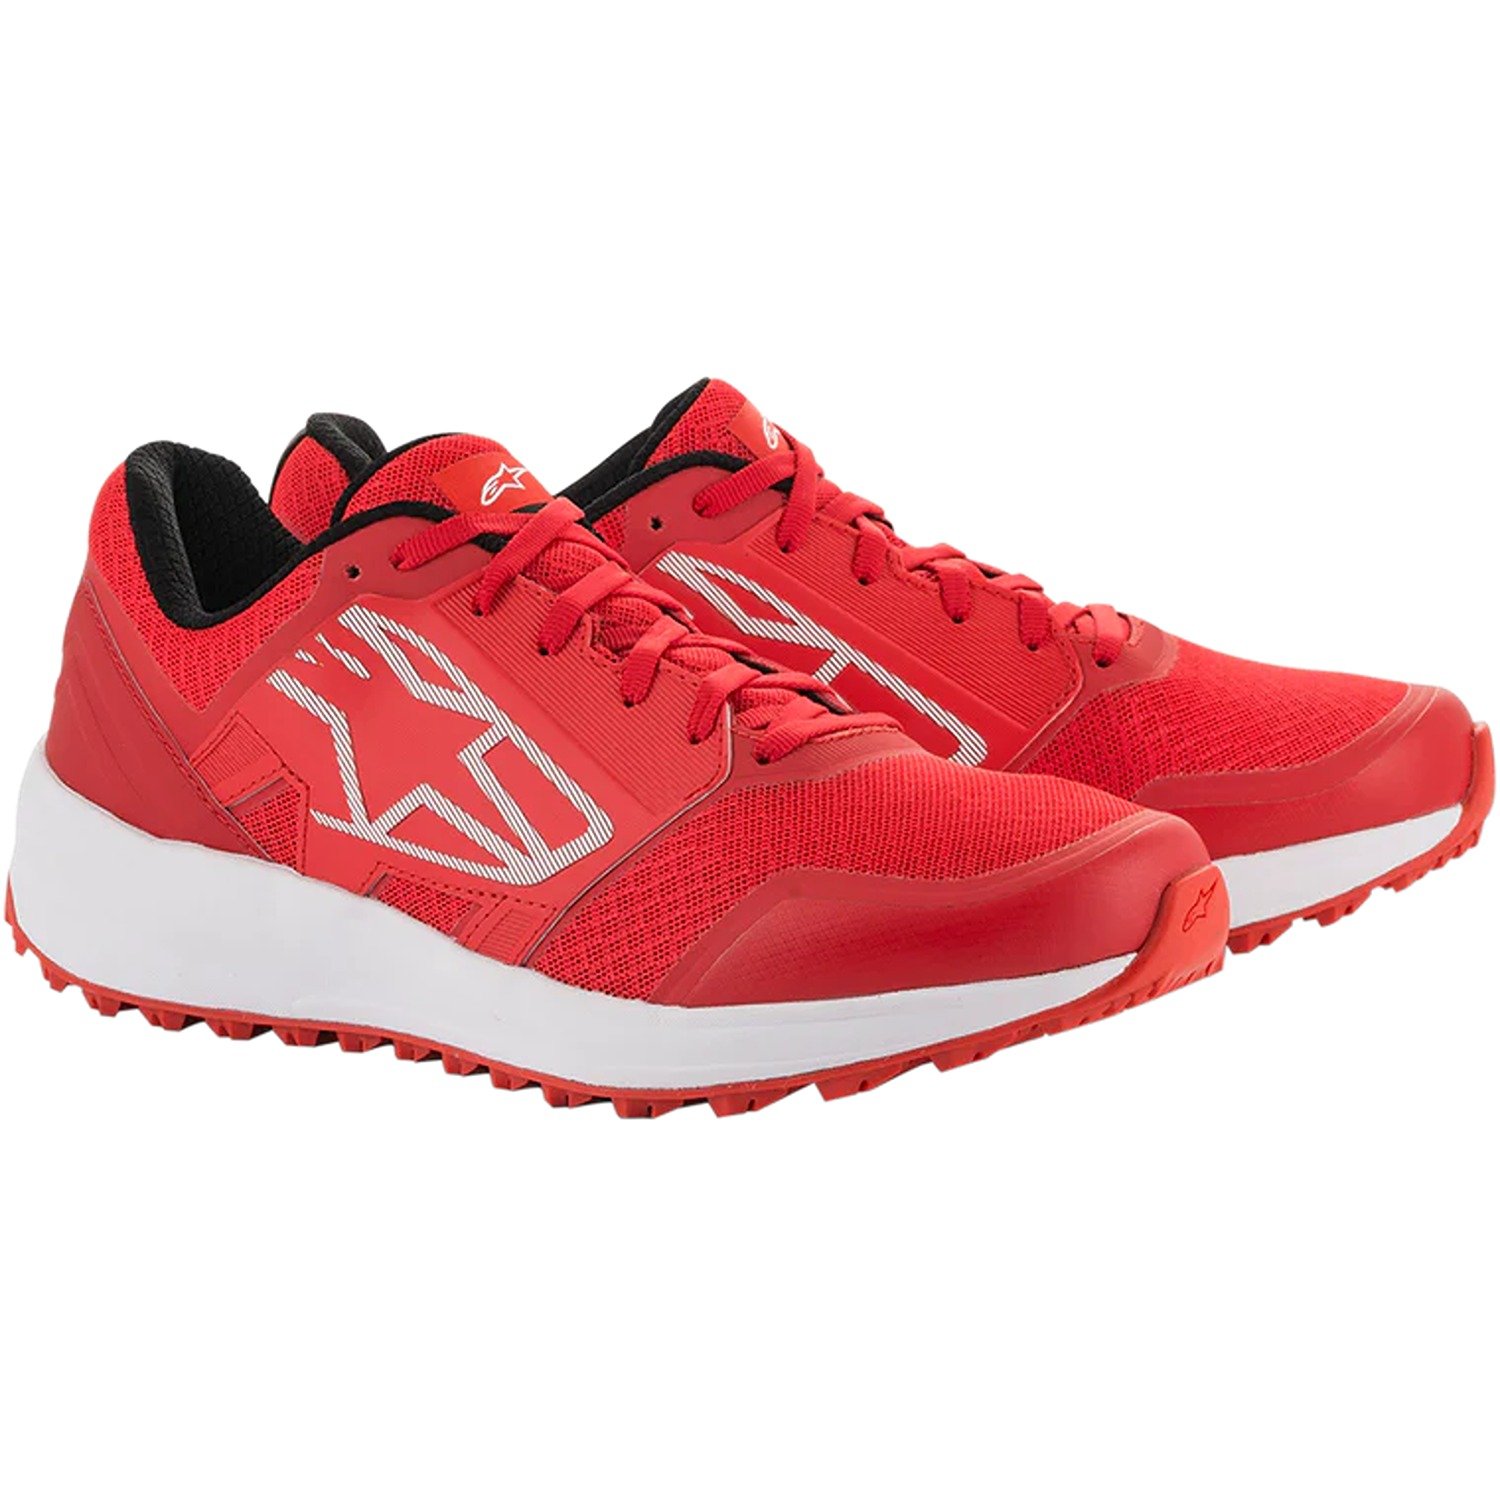 Image of Alpinestars Meta Trail Shoes Red White Taille US 45